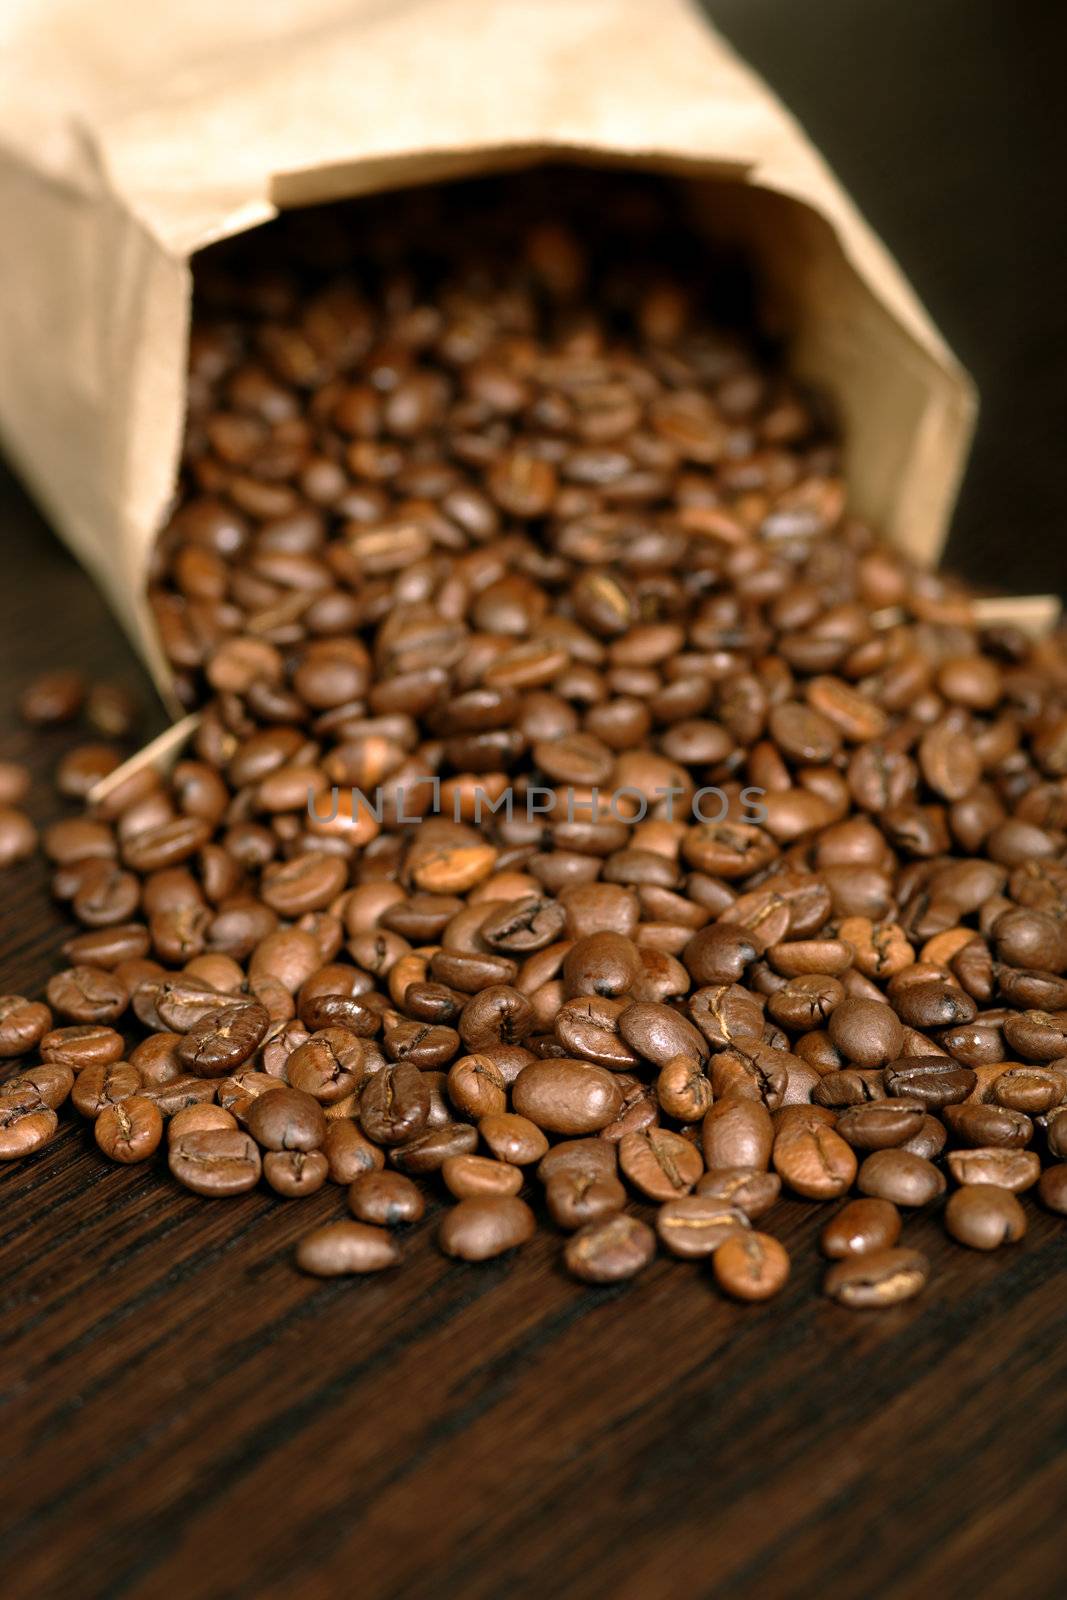 Coffee beans spilling from a paper bag.
